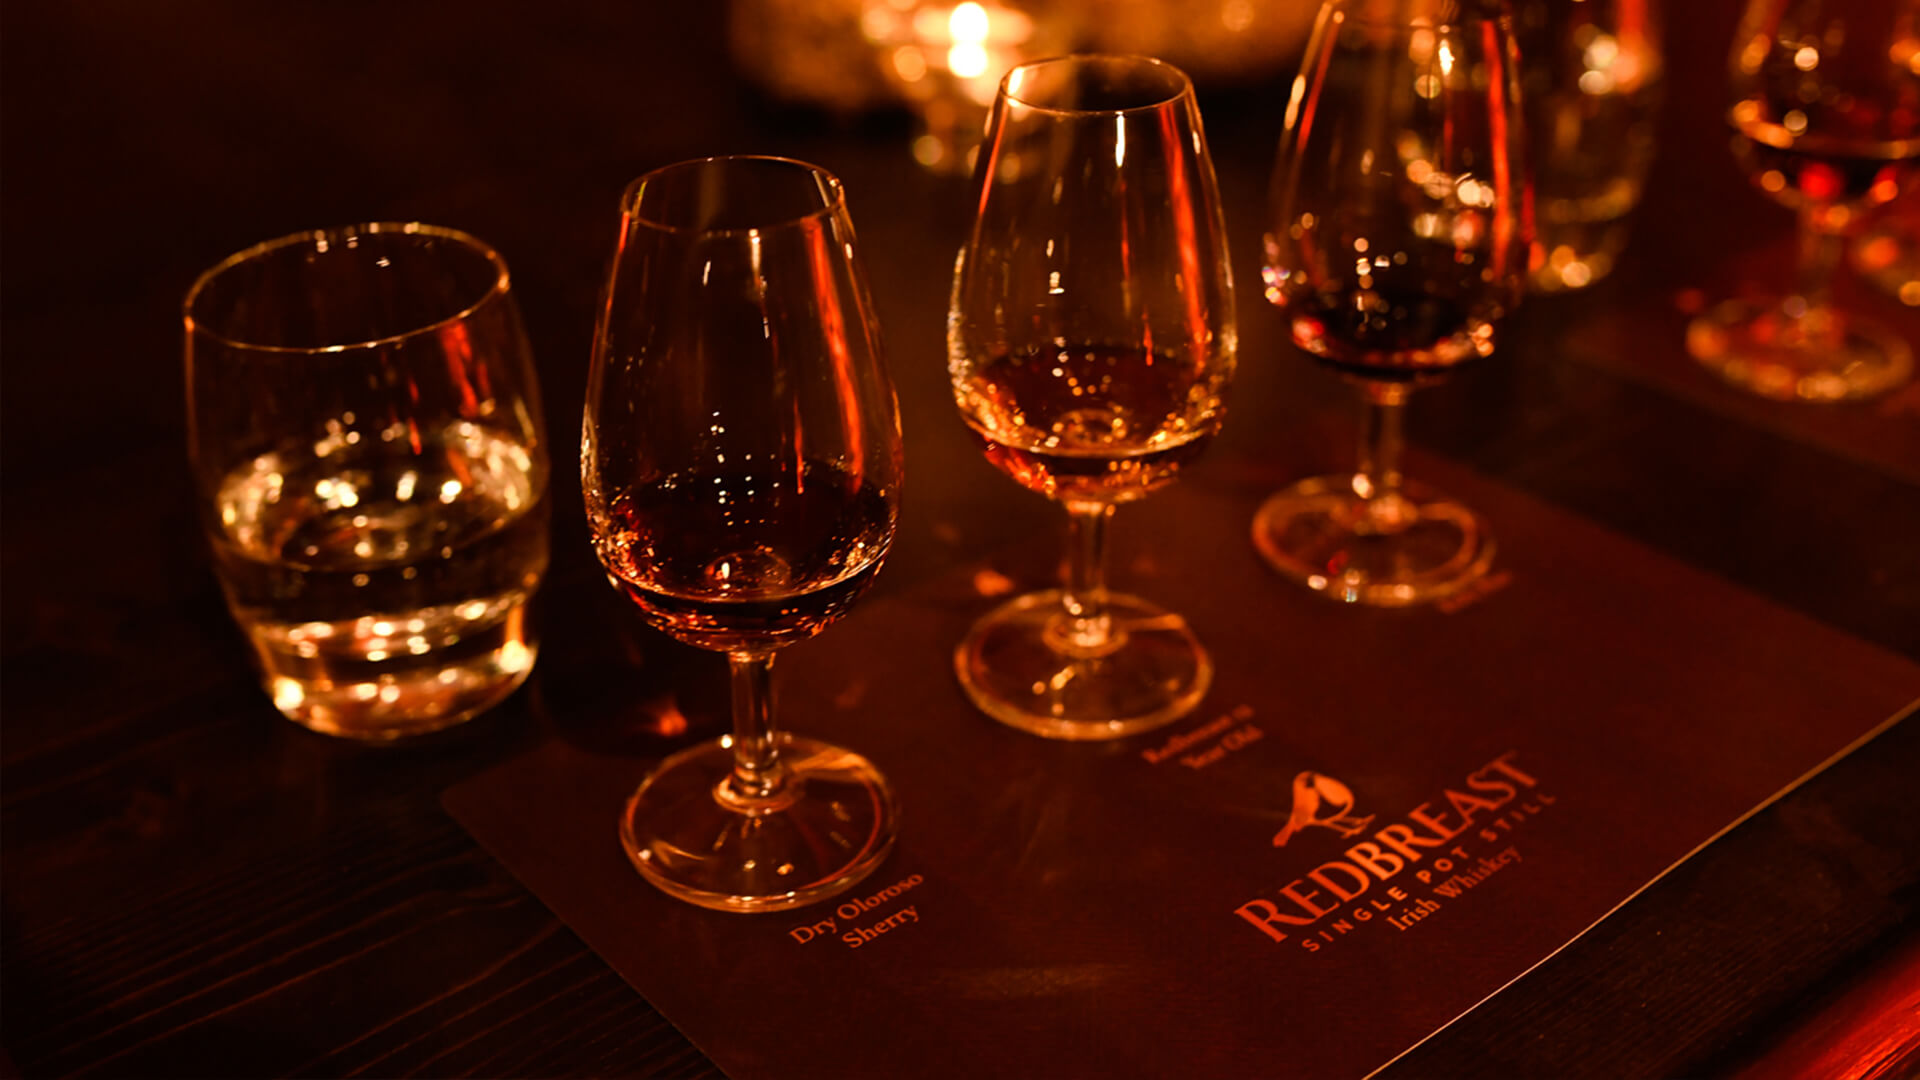 We sampled RedBreast 27 Year Old and the sherry which had flavoured the barrels in the beautiful orangery building.